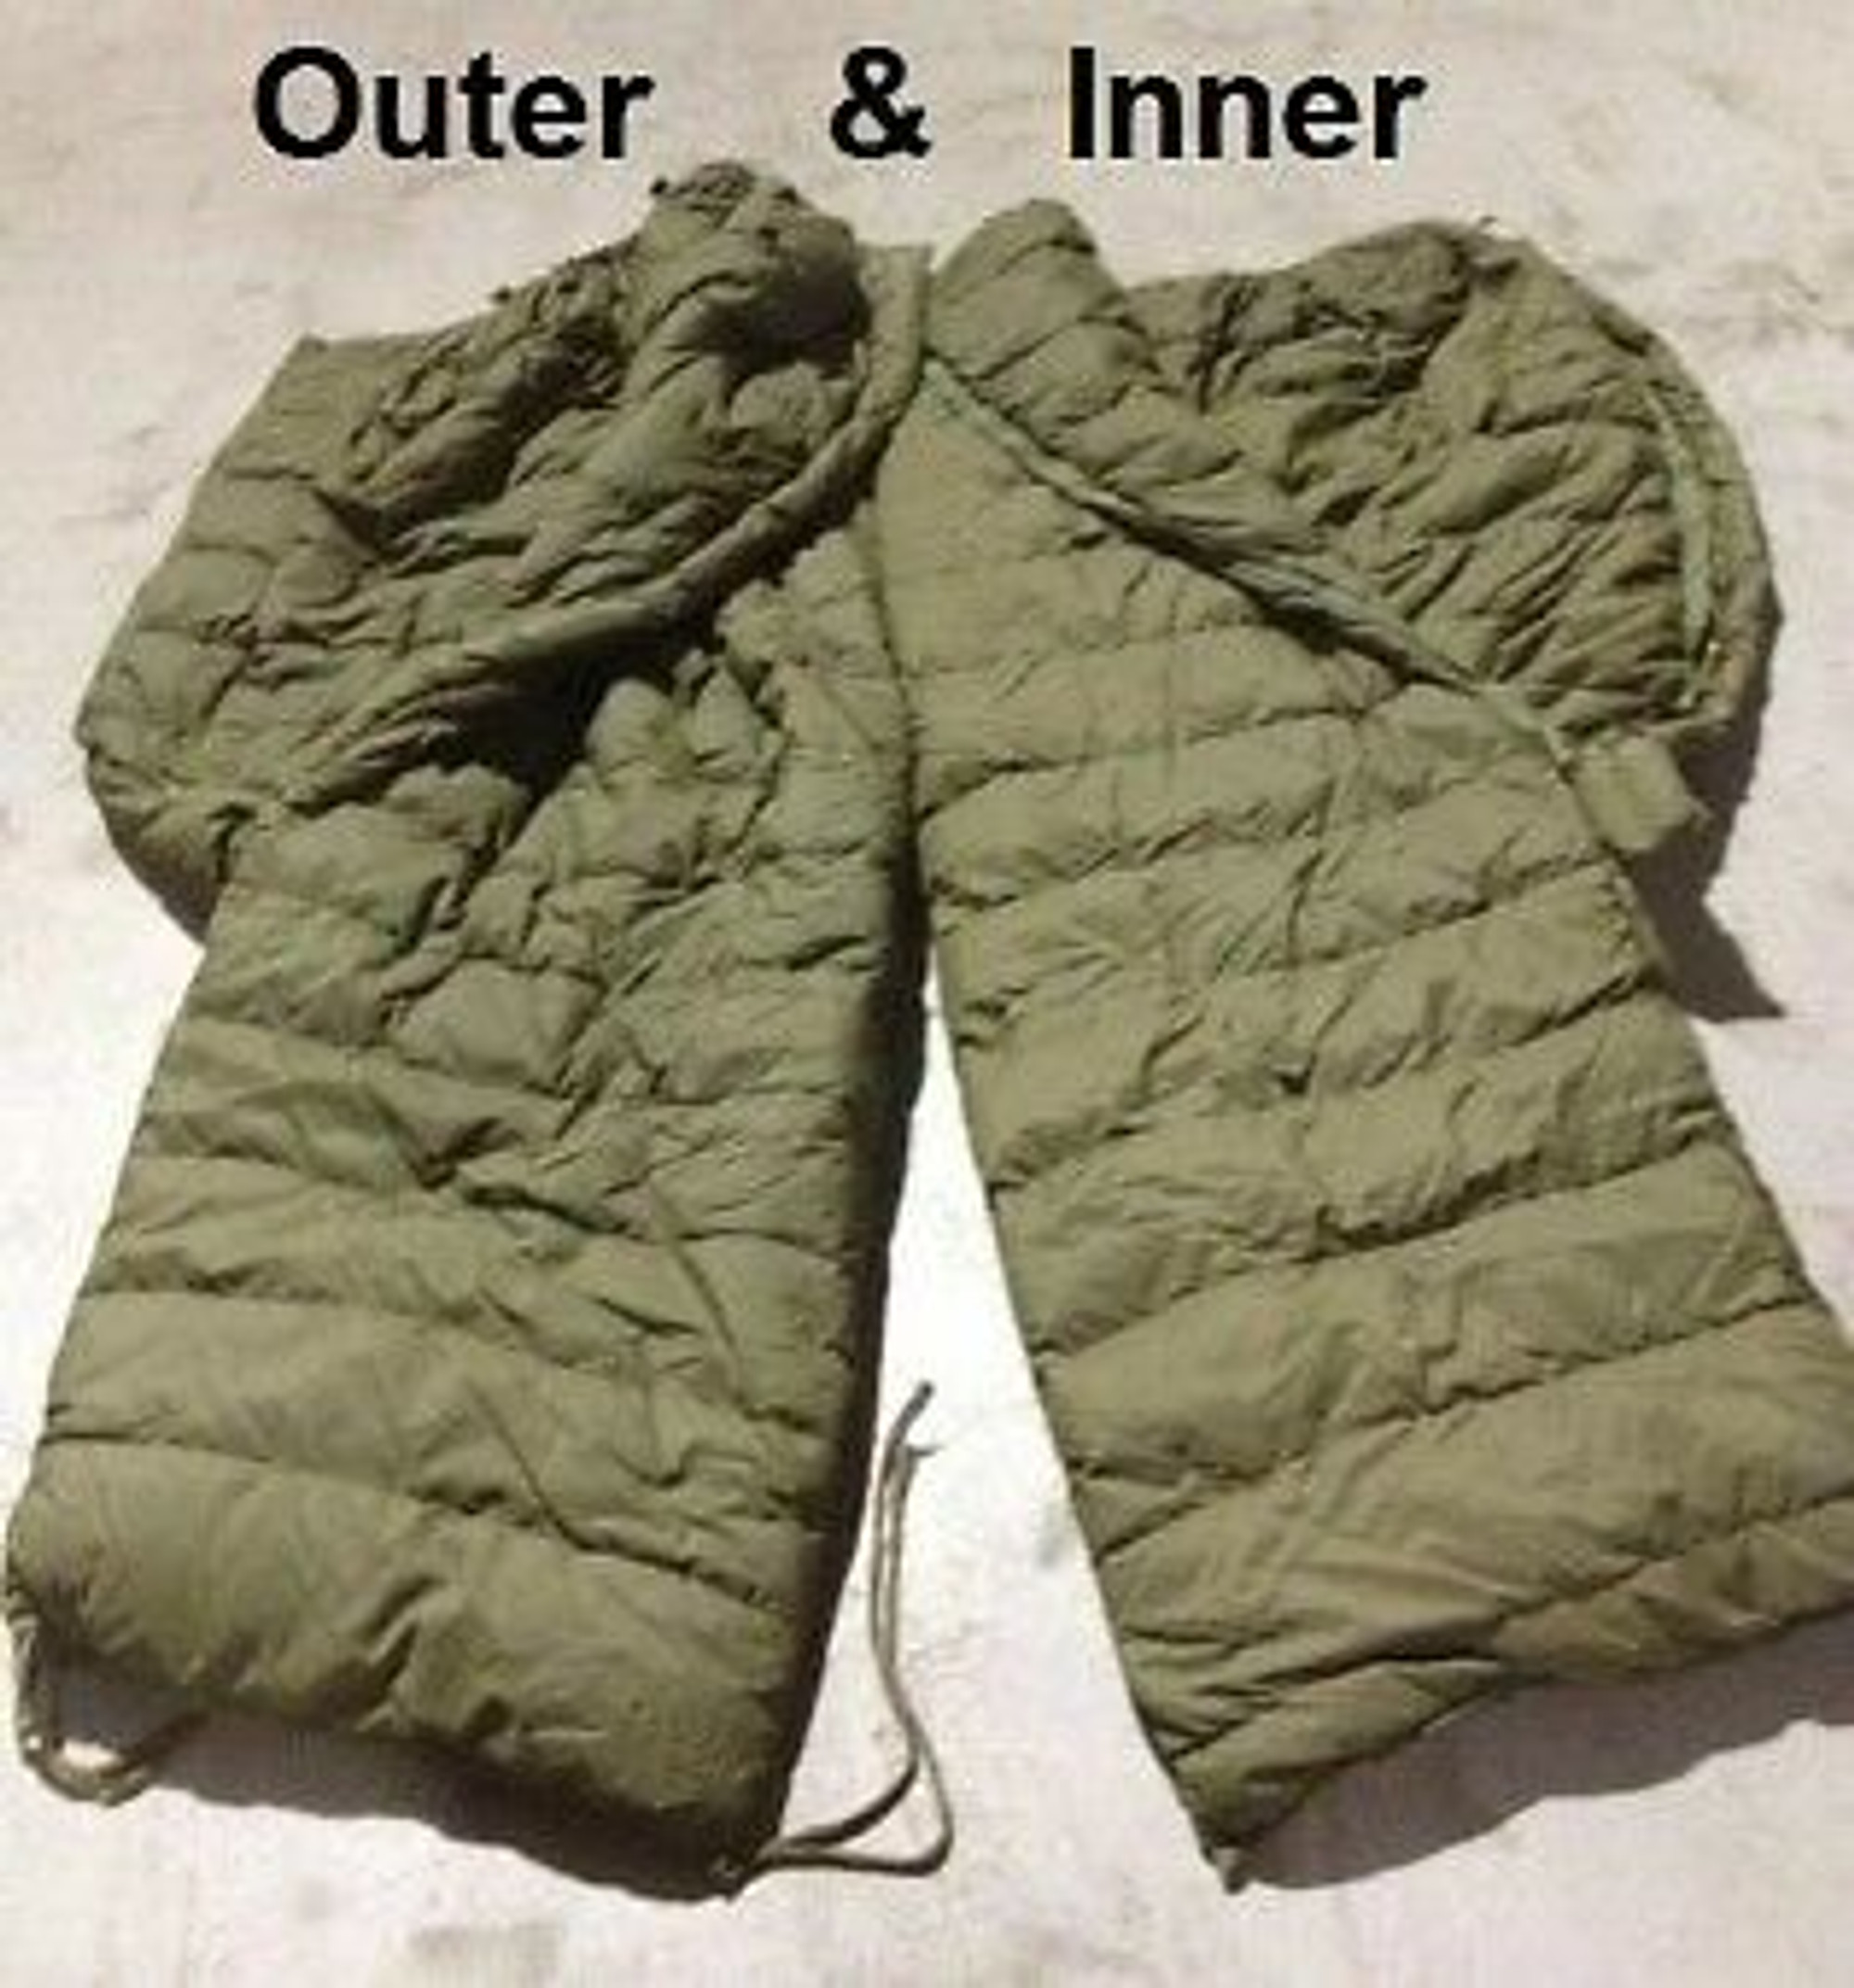 Canadian Armed Forces INNER Sleeping Bag - AS IS Condition